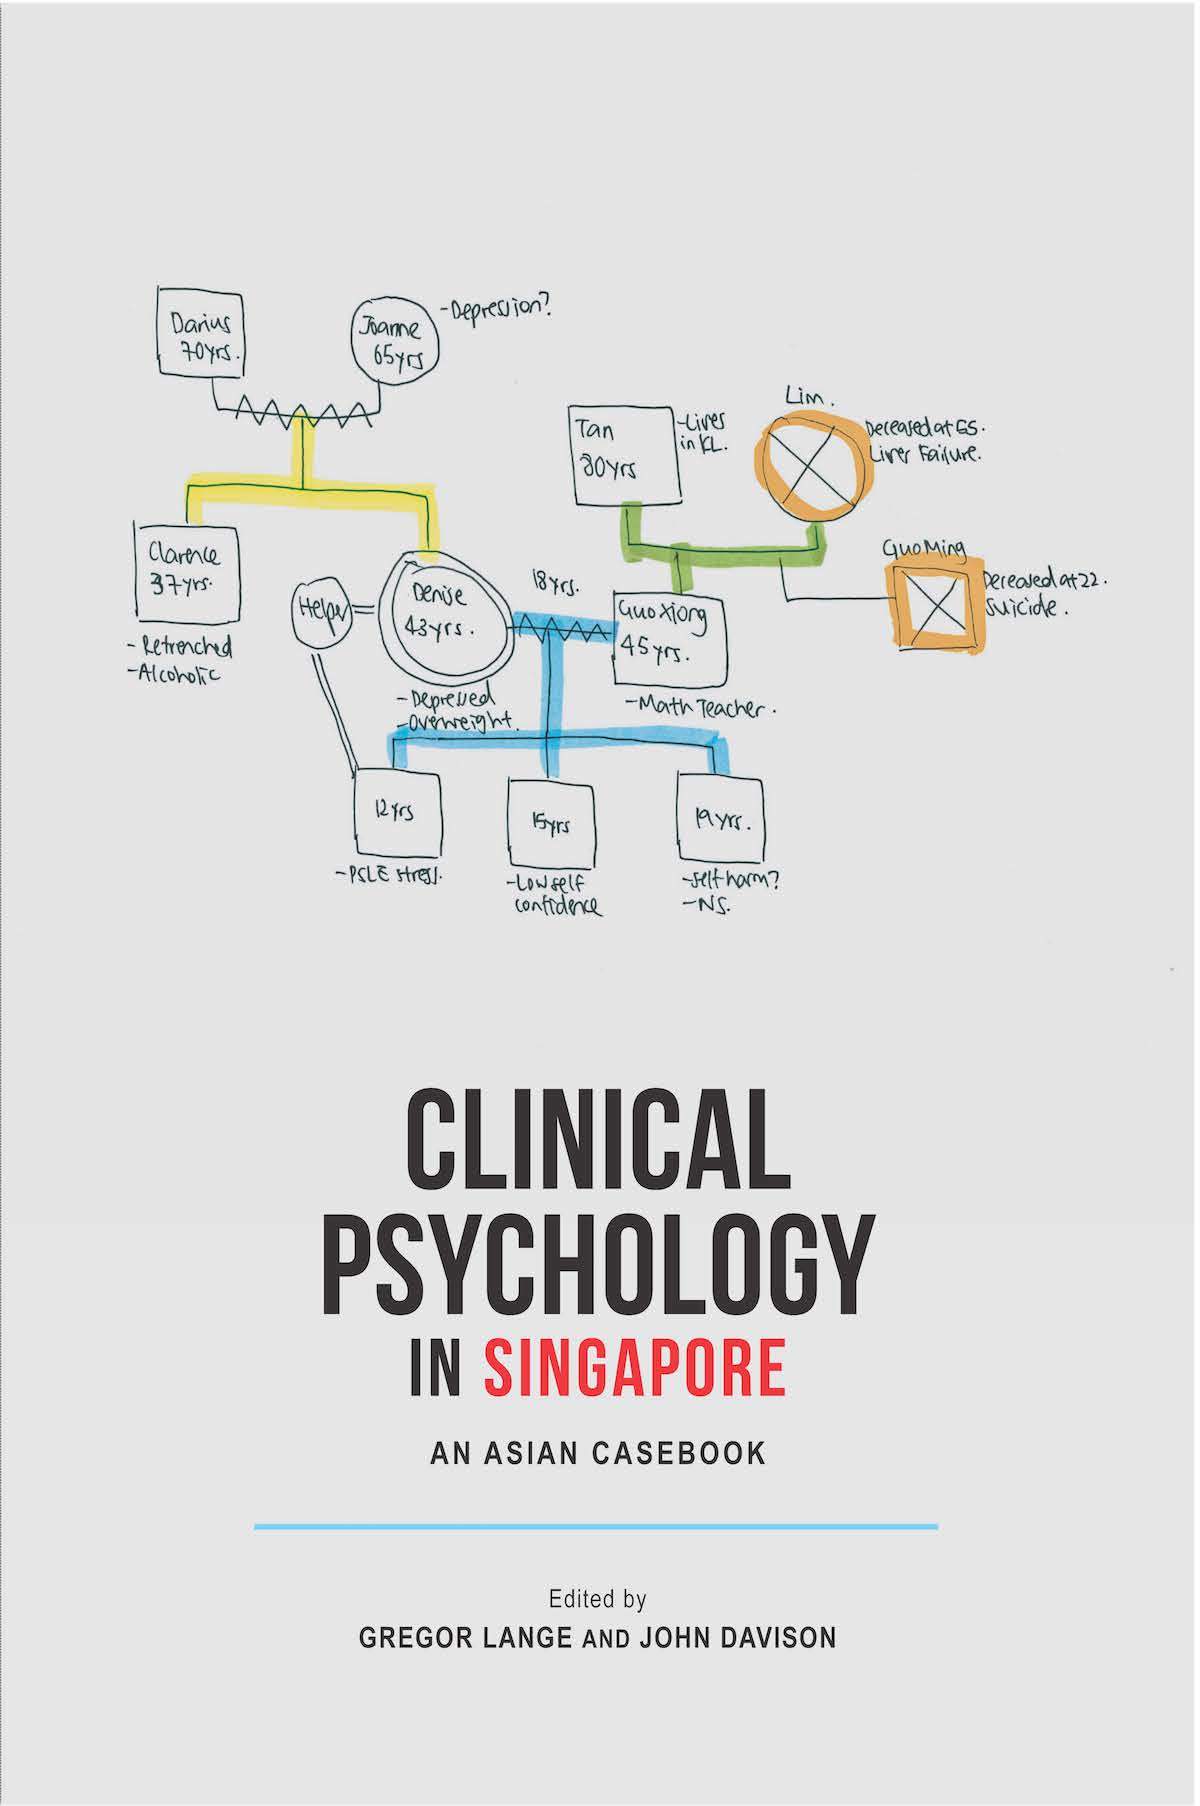 Clinical Psychology in Singapore - Localbooks.sg